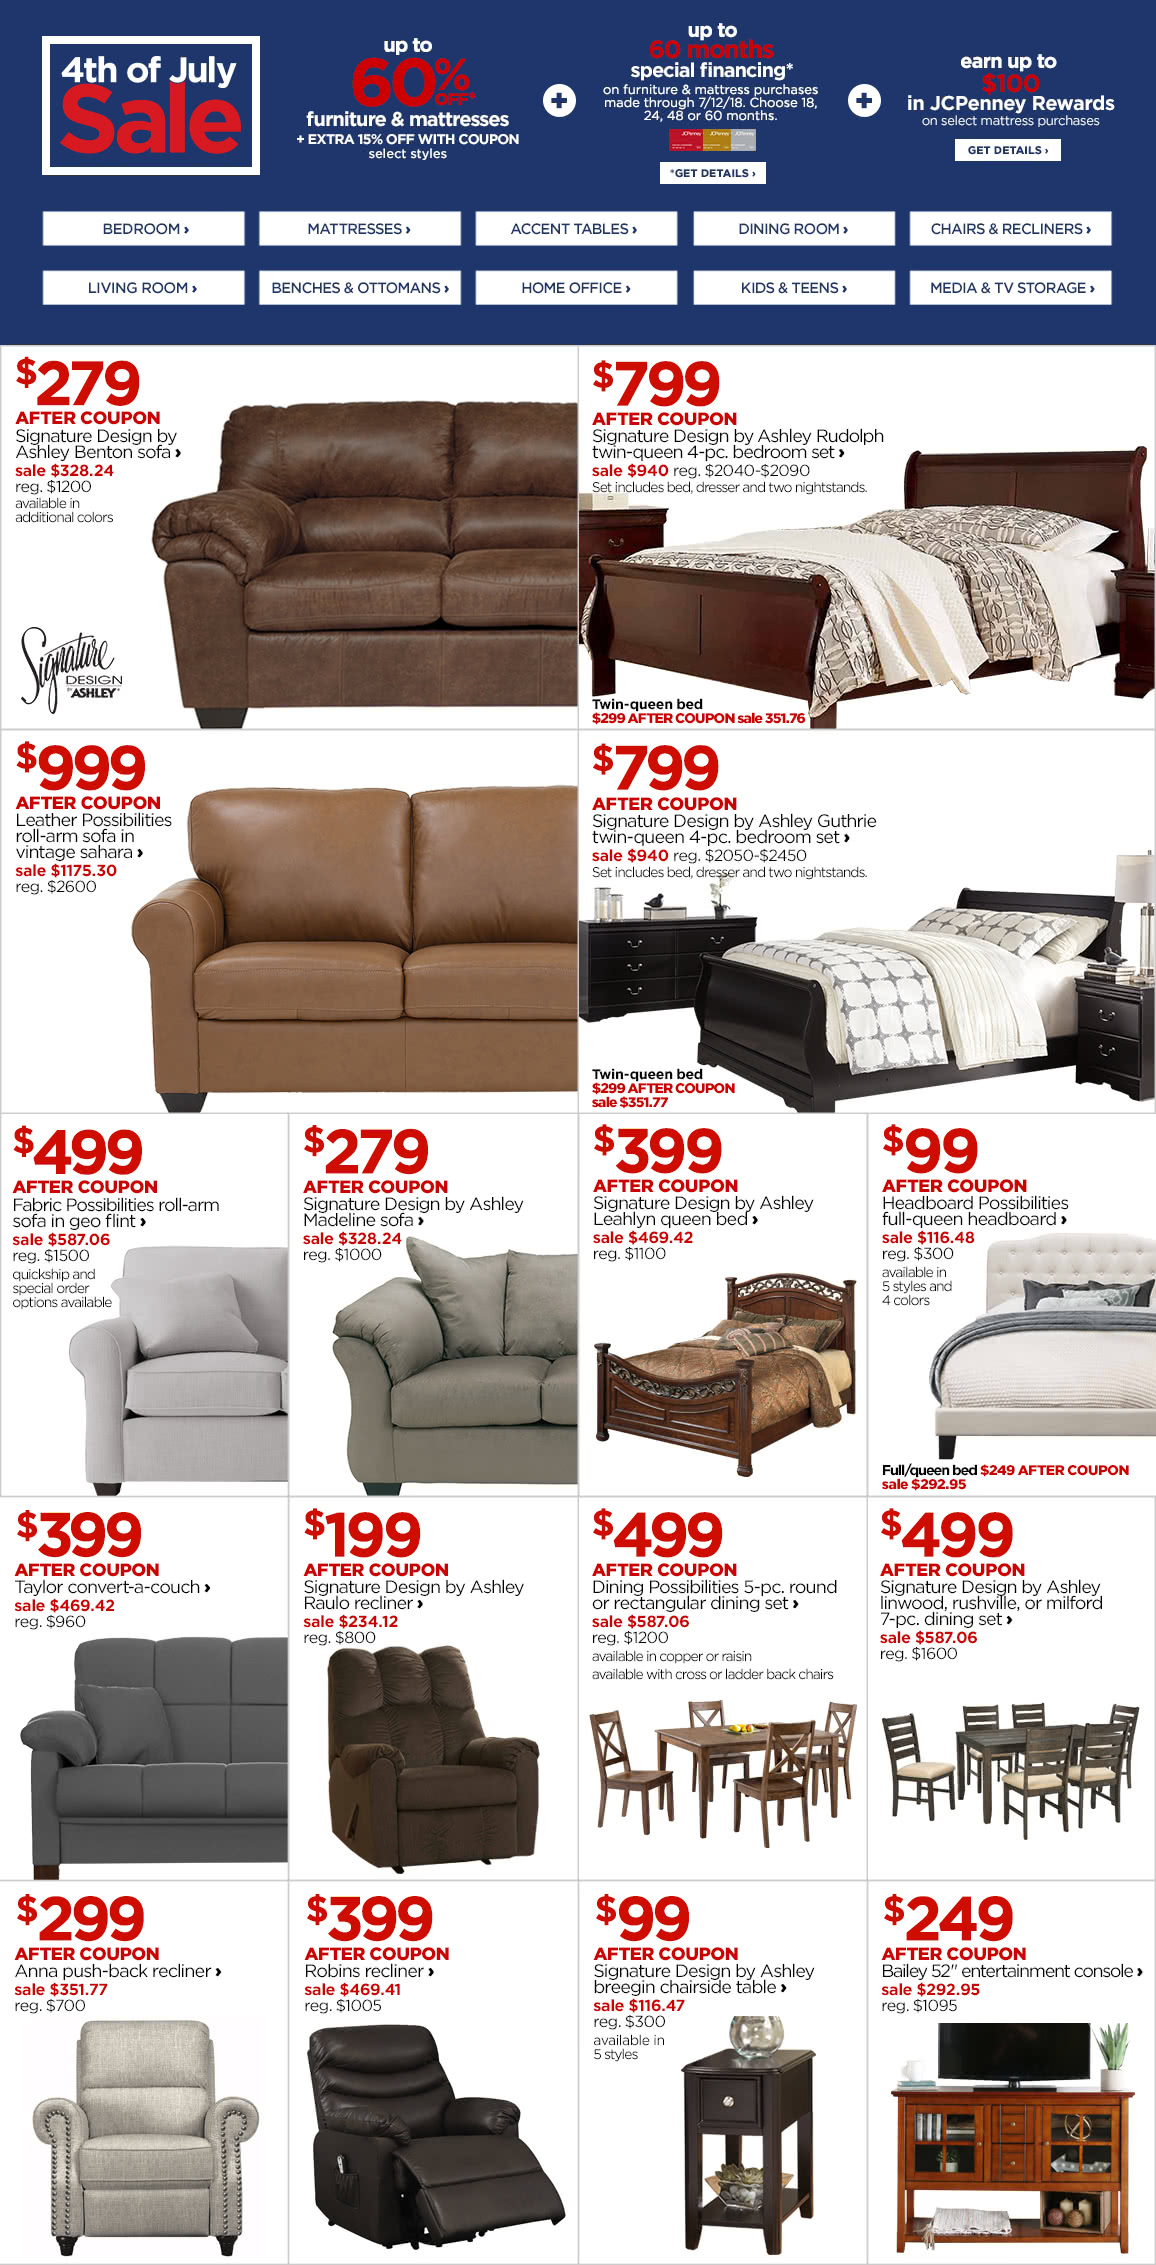 Furniture Store Near Me, Shop Bedroom, Living & Dining Room Sets at JCPenney